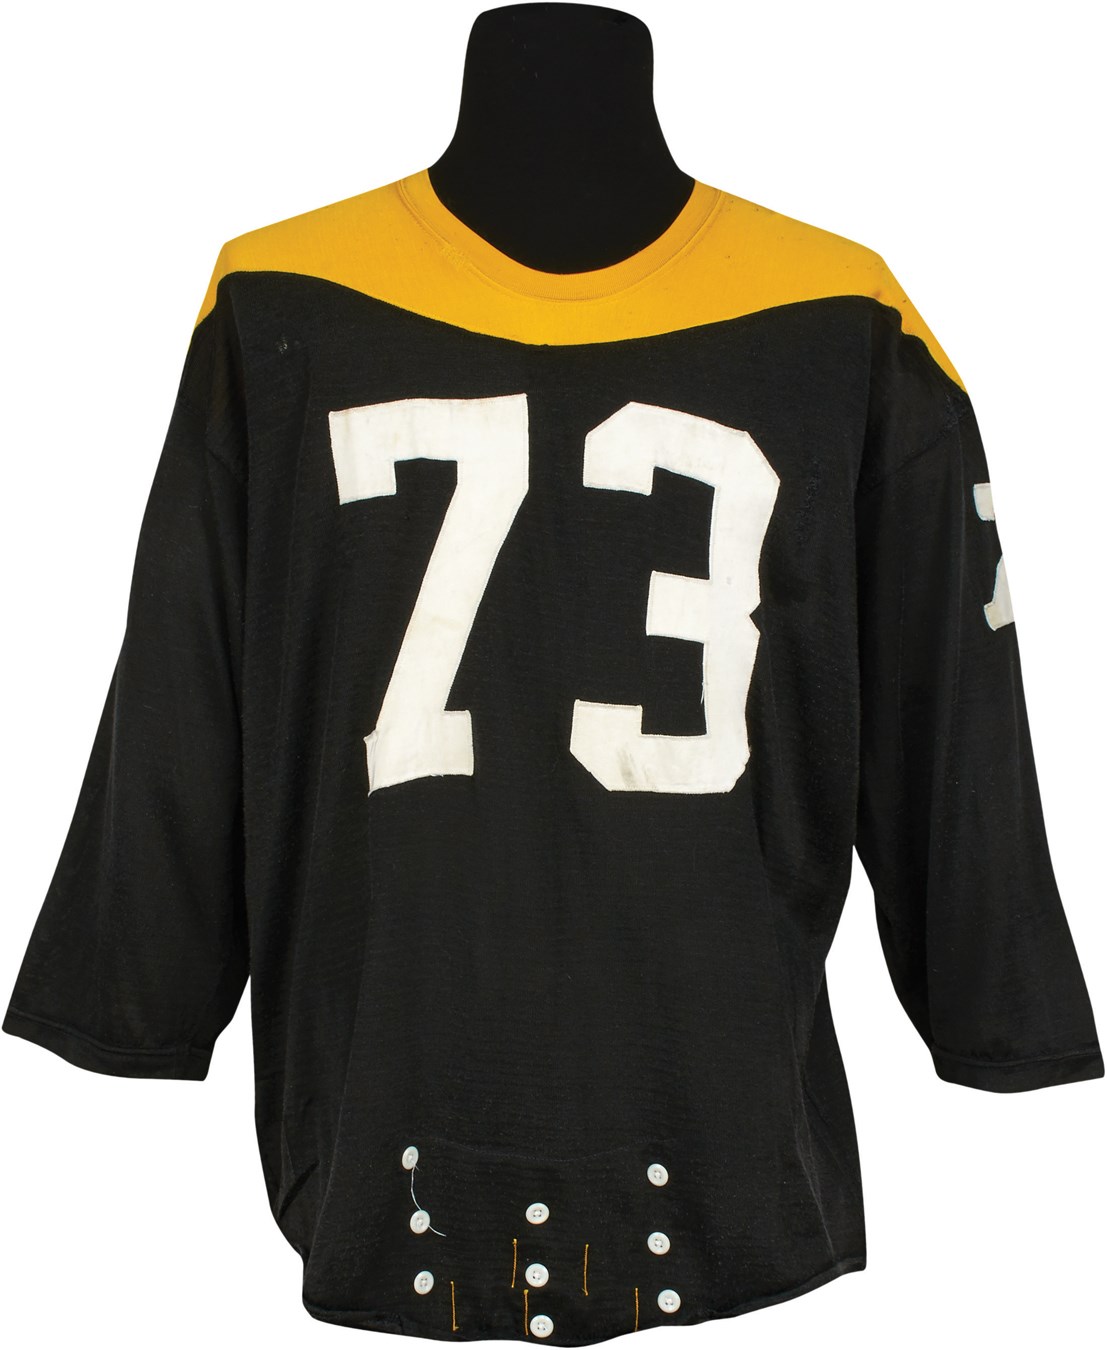 - 1966-67 Ray Mansfield Pittsburgh Steelers Game Worn Jersey (Photomatched)